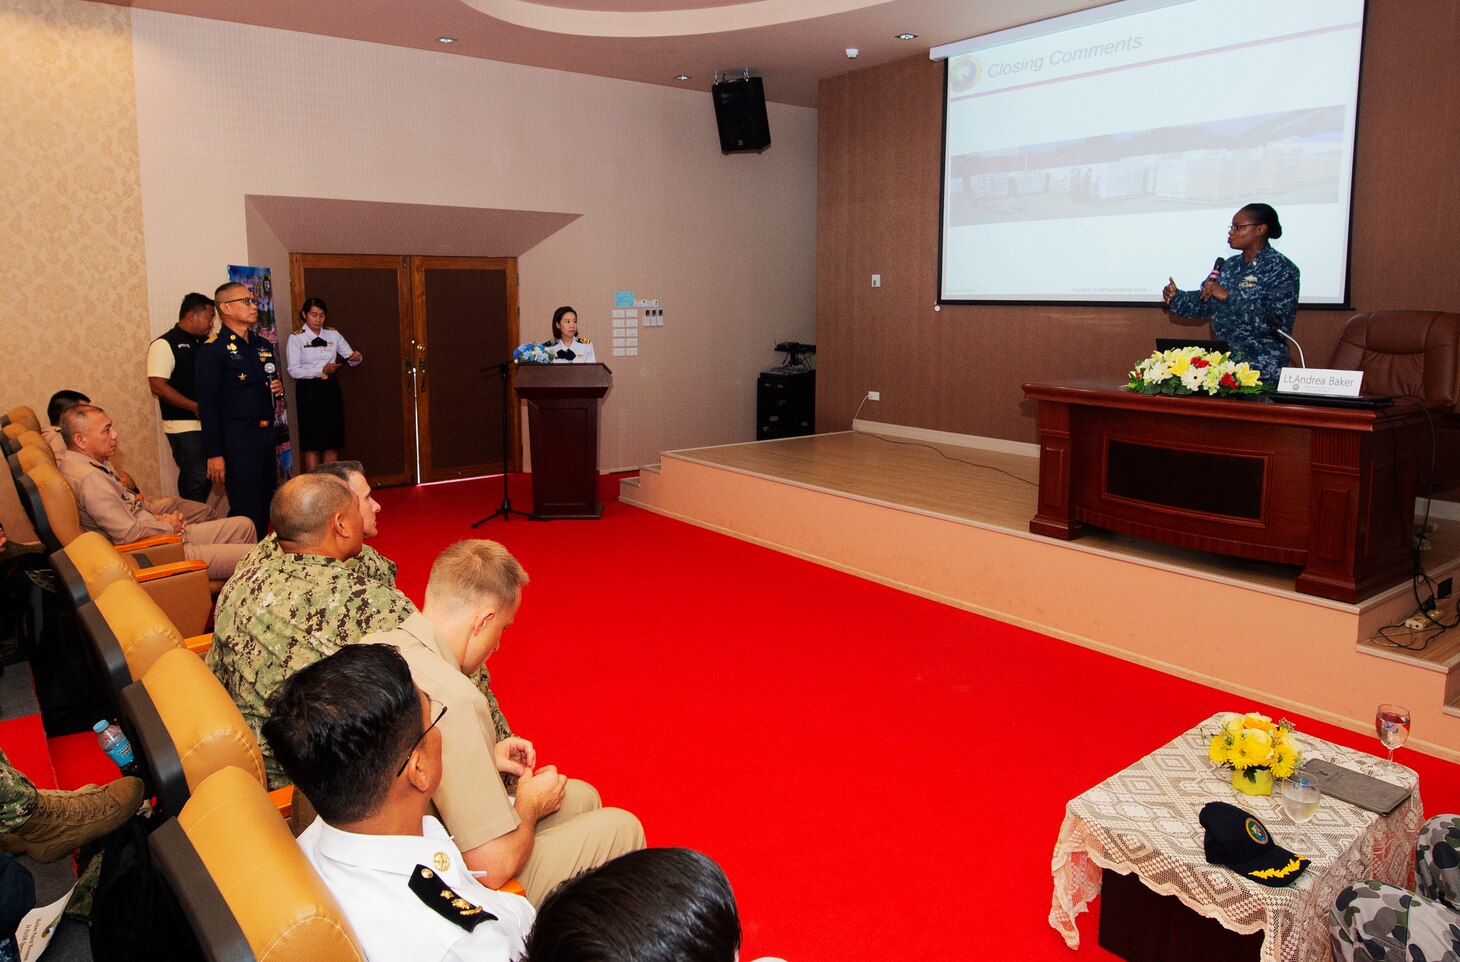 Sattahip, Thailand (May 20, 2019) – U.S. Navy Lt. Andrea Baker, assigned to Pacific Partnership 2019 (PP19), answers questions from PP19 participants following a presentation on humanitarian assistance and disaster relief (HADR) guidelines as part of an HADR knowledge exchange at the Queen Sinikit Hospital. Pacific Partnership, now in its 14th iteration, is the largest annual multinational humanitarian assistance and disaster relief preparedness mission conducted in the Indo-Pacific. Each year the mission team works collectively with host and partner nations to enhance regional interoperability and disaster response capabilities, increase security and stability in the region, and foster new and enduring friendships in the Indo-Pacific.